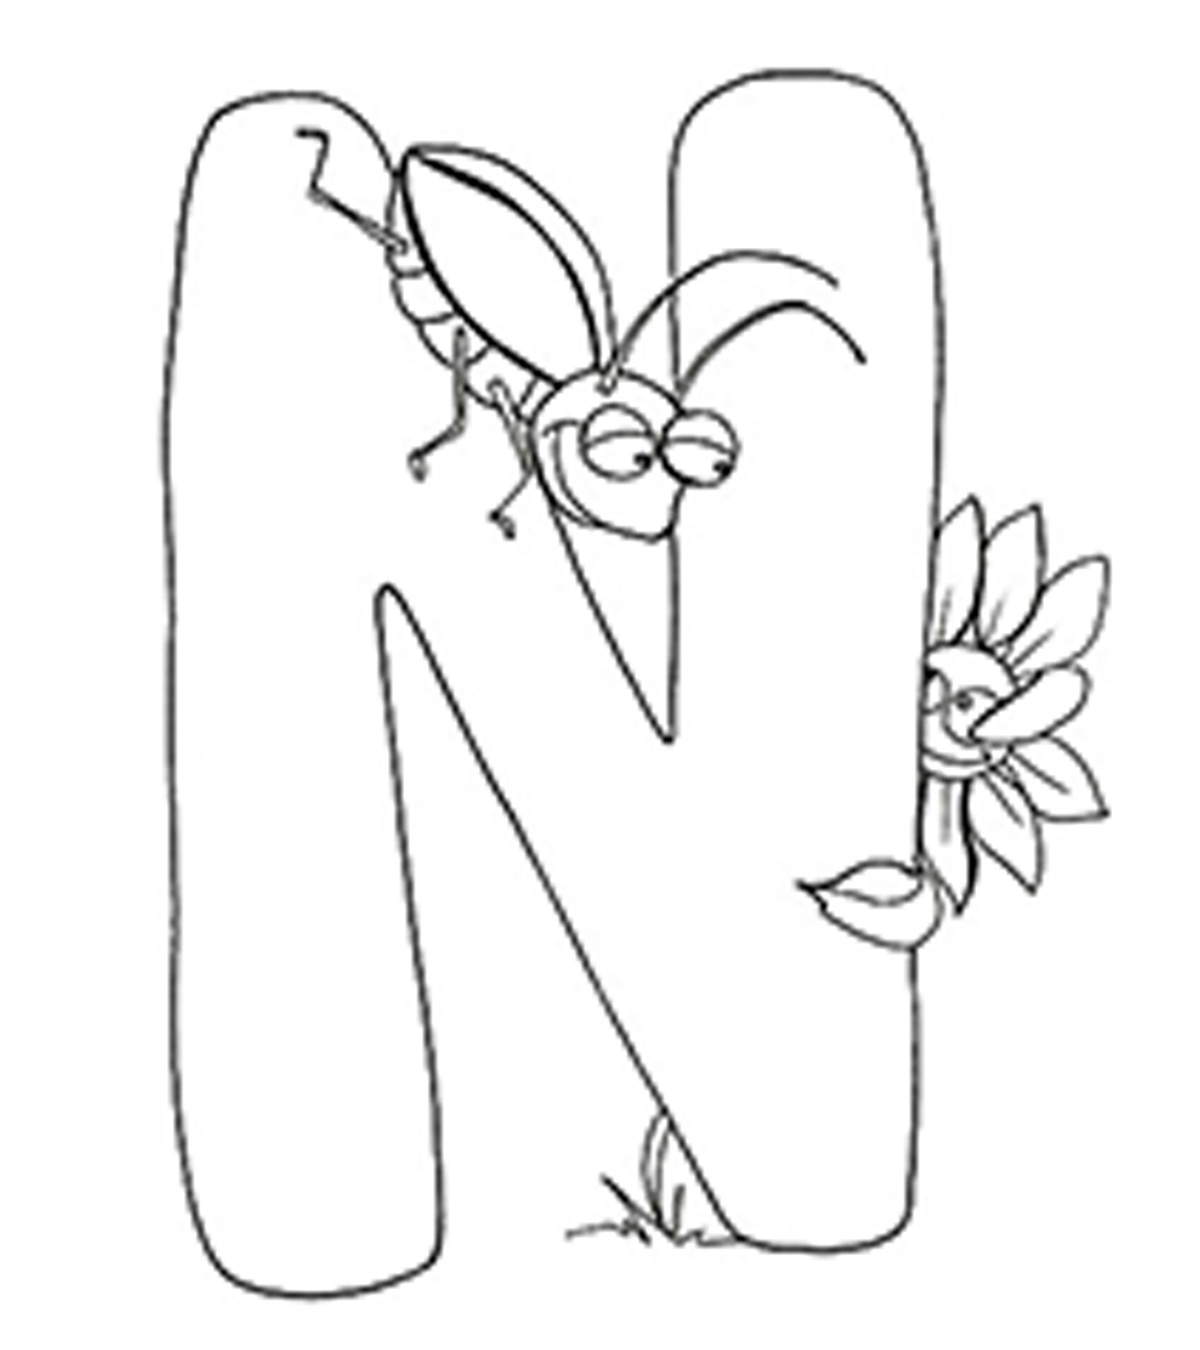 Letter N Coloring Pages For Adults Coloring Pages